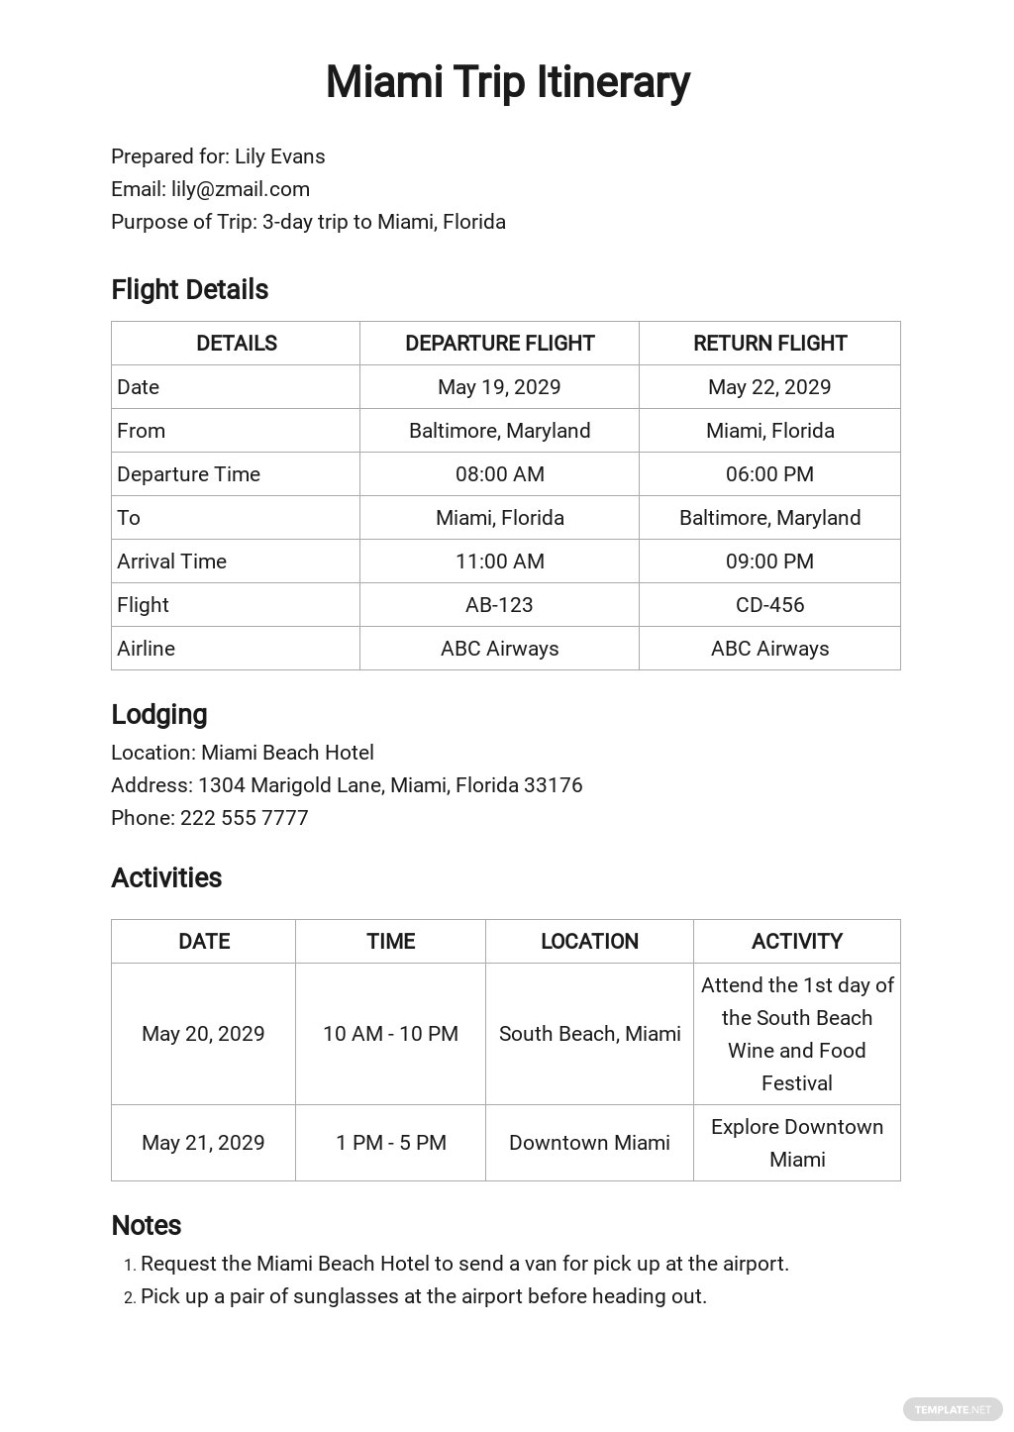 Travel Itinerary Template [Free Pdf] - Word (Doc) | Apple (Mac) Pages Throughout Travel Agenda Template